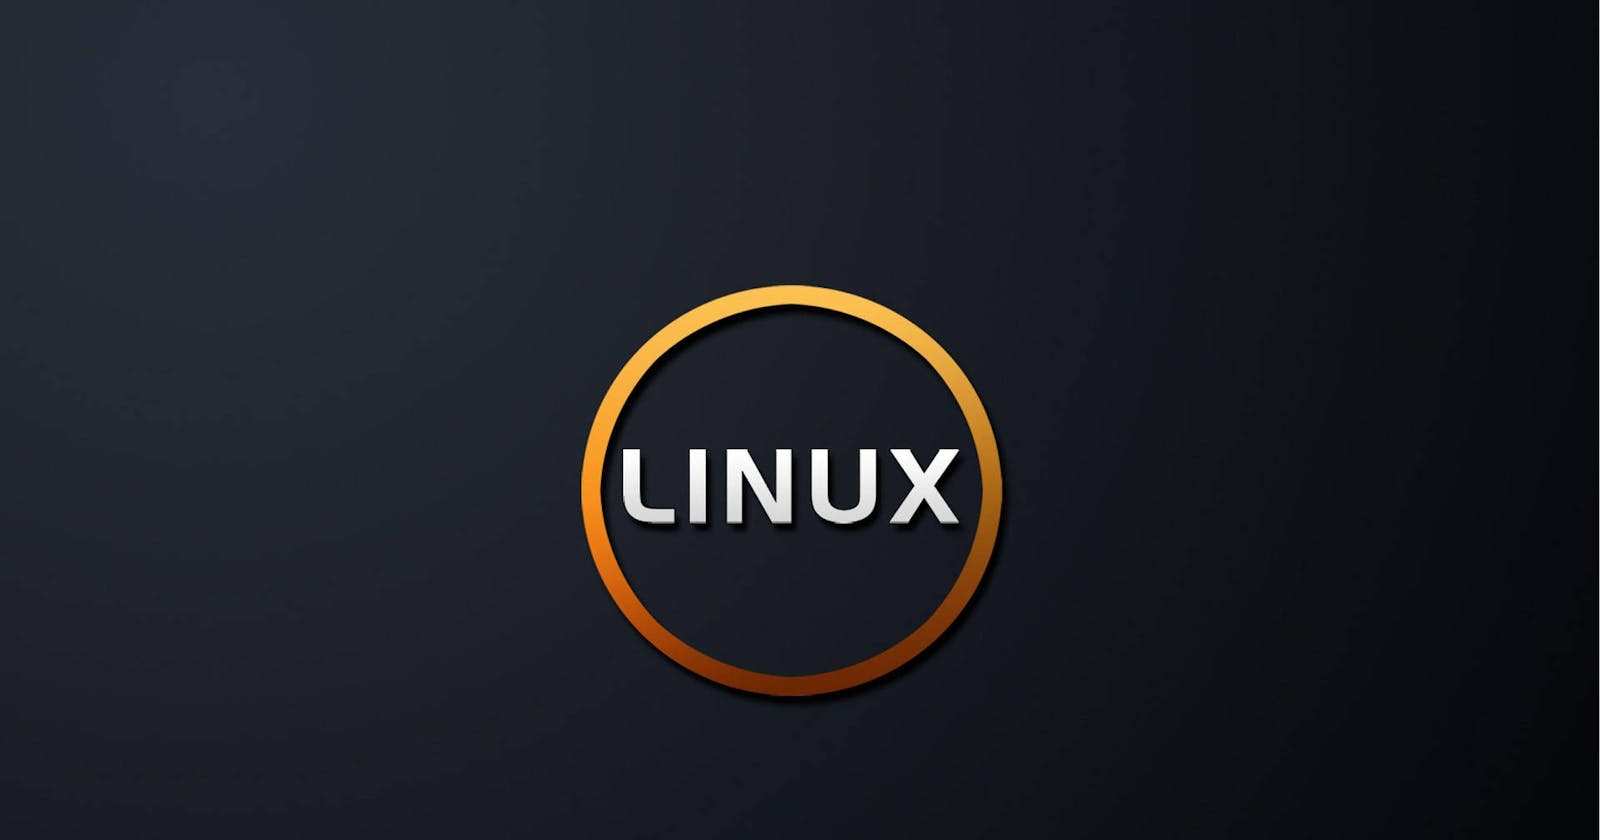 Basic commands of linux